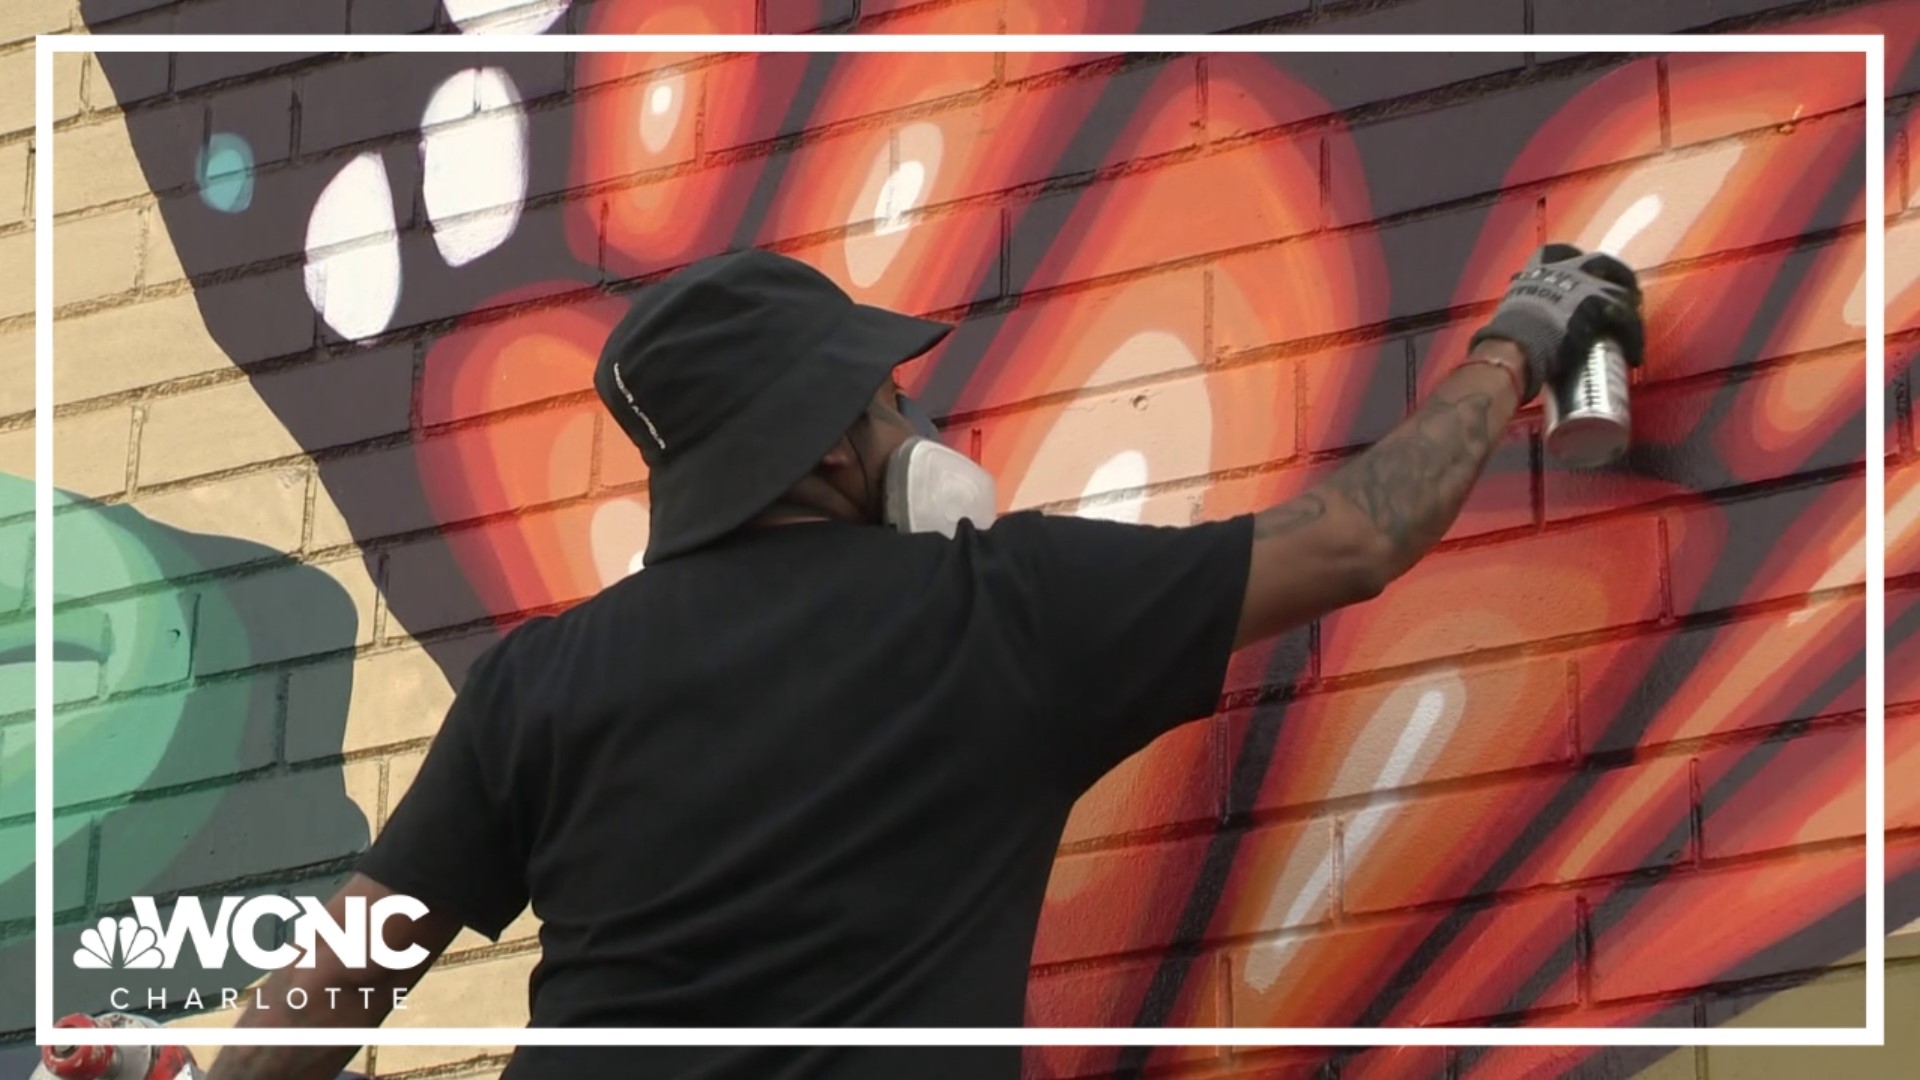 All five murals were painted by local, regional and national artists, each leaving their mark on Charlotte.